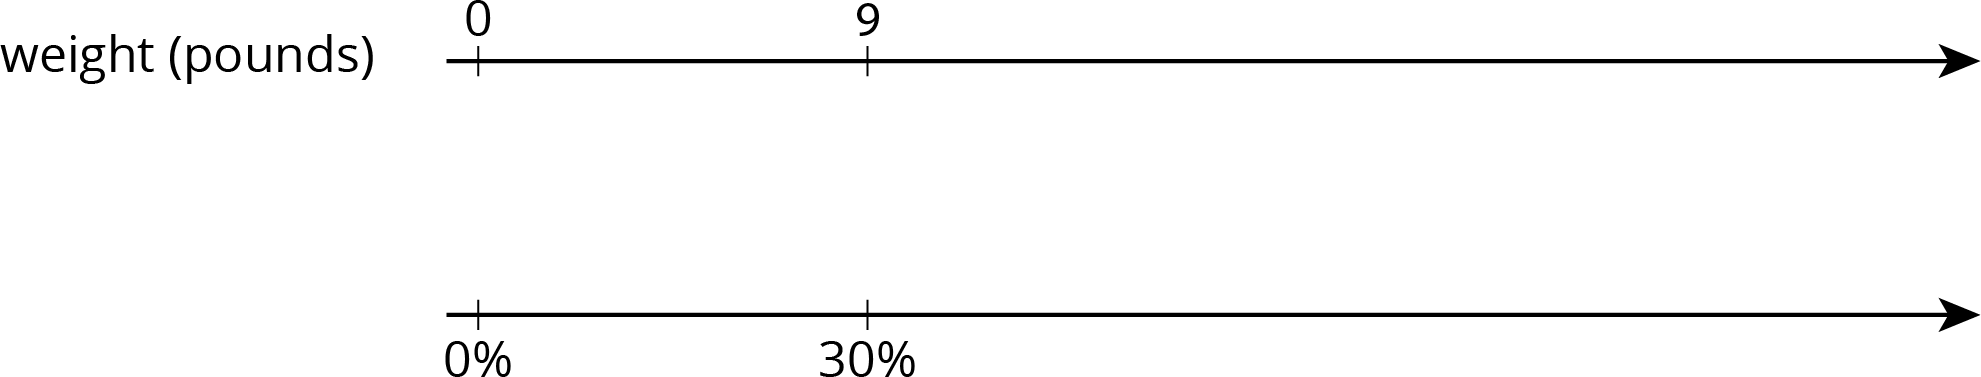 A double number line for “weight in pounds” with 2 tick marks. The top number line has the number 0 on the first tick mark and 9 on the second. The bottom number line has 0 percent on the first tick mark and 30 percent on the second.